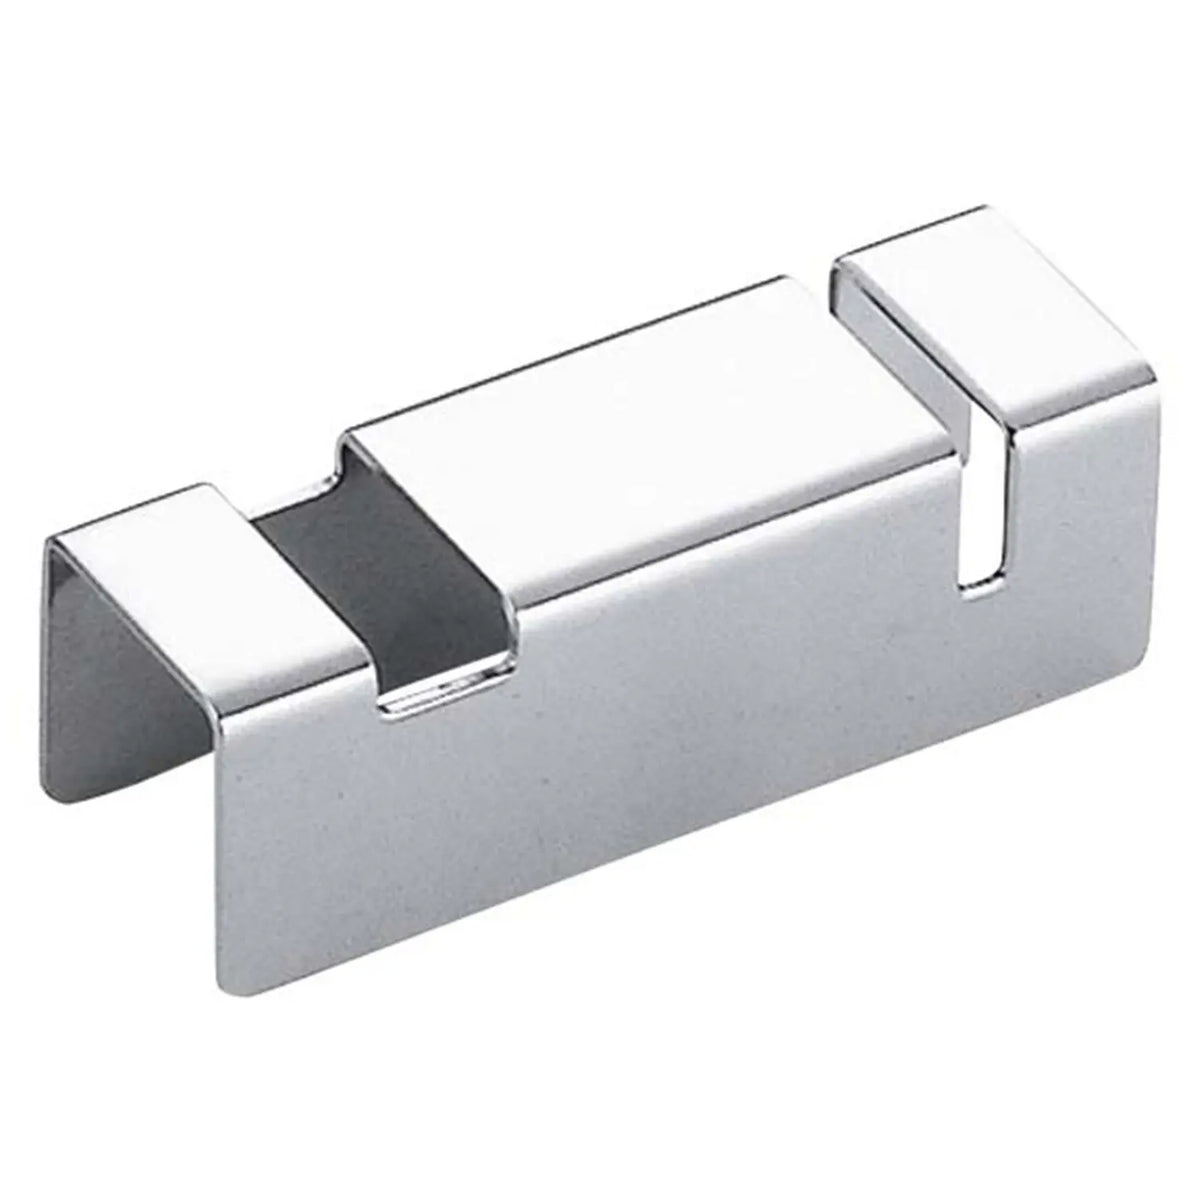 EBM Stainless Steel Cutlery Rest Square